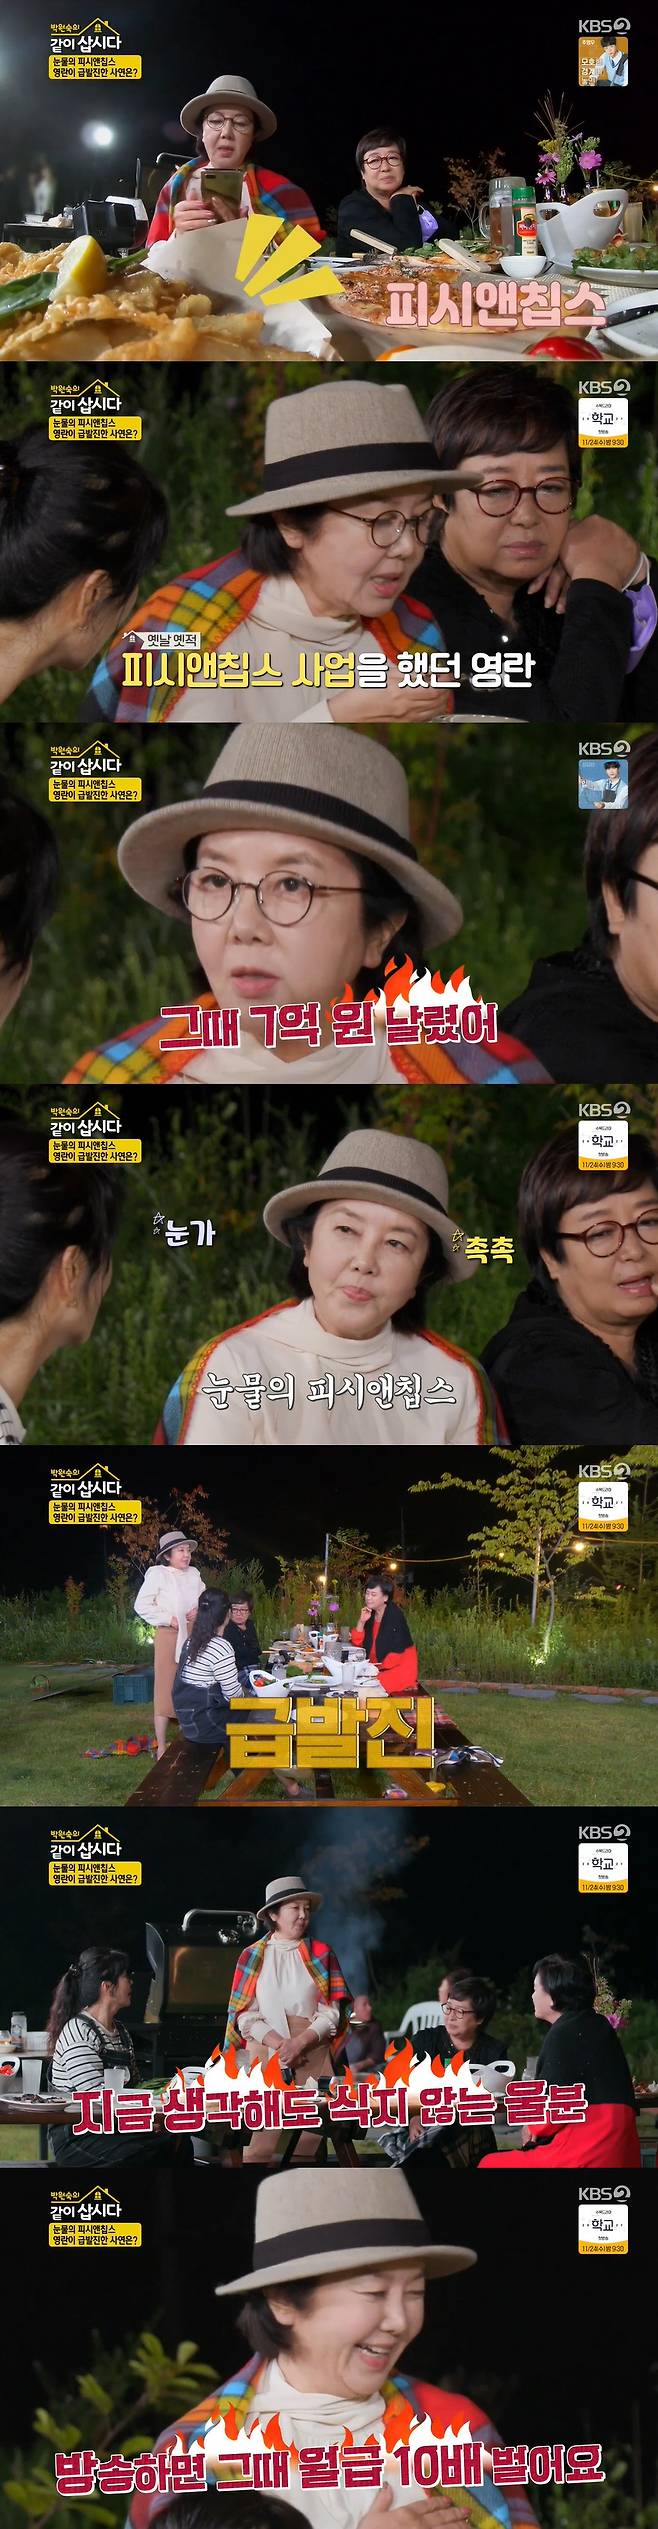 Kim Chung has revealed the nightmare of marriageRing.On the 17th KBS 2TV Lets Live With Park Won-sook Season 3, a sage Park Won-sook, Hye Eun, Kim Yeong-Ran, and Kim Chung were shown enjoying garden Party with international couples.On this day, a sage heard that he was going to meet an international couple and talked about marriage and recalled memories of a coma that he had forgotten.First, Park Won-sook said, I have something to catch when I talk about coma.He said: I told Daughter-in-law at the time of the son marriage not to coma to think complicated.I told him not to do anything, but if he was burdened, he told me to do only one brooch. But then he told his sisters that there are many broochs. Kim Yeong-Ran said, Blood Diamond brooch was old fashioned, and Park Won-sook explained, I did not talk about Blood Diamond.Kim Chung then laughed, saying, My mother-in-law is Park Won-sook, but I think I should have done a few carats of Blood Diamond because it is a brooch.Kim Chung then revealed the nightmare of Ring, which he received as a marriage gift.I am pissed when I talk about coma, he said. I had a lot of stories about marriageRing.The marriage Ring was a Ring that went through five women. Kim Chung said, Five marriage men gave the Ring to a woman and then took it when they were diverted and put it in a bank. Park Won-sook said, But the sizes were right.Thats also weird, he said, surprised.Kim Chung said, I came out naked when I was in a divorce. Ringo came out in a coma.But people said I was handed over to the Ring. He said, I thought it was all my fault and went to Gangwon Province for a year and a half.I think I will cry, he said, blushing his eyes and saddening him.Meanwhile, Kim Yeong-Ran recalled the past fish and chips business, saying, I have memories of fish and chips when fish and chips came out while enjoying food with international couples.Is not our country more expensive than Europe?But I did fish and chips business in Korea at that time. He confessed, I did it in Seocho-dong, Gwanghwamun, and Sogang University, and then I flew 700 million won. The reason why fish and chips are not in Korea is that Seattle has a lot of sea, so fish is fresh, and Korea is frozen.So the taste itself does not taste in Korea, he said. But then I did not know it, so I did it. Kim Yeong-Ran said, I have never done anything, I have done everything. When I recalled the time of my past business, my voice grew angry and angry.I told him not to broadcast it then, but he was full of money. It is fish and chips of tears.I was angry because of this, so I went to England. He was pregnant and did not broadcast and did a restaurant business.At that time, I gave 3 million won a month, but when I broadcast it, I earned 10 times. 